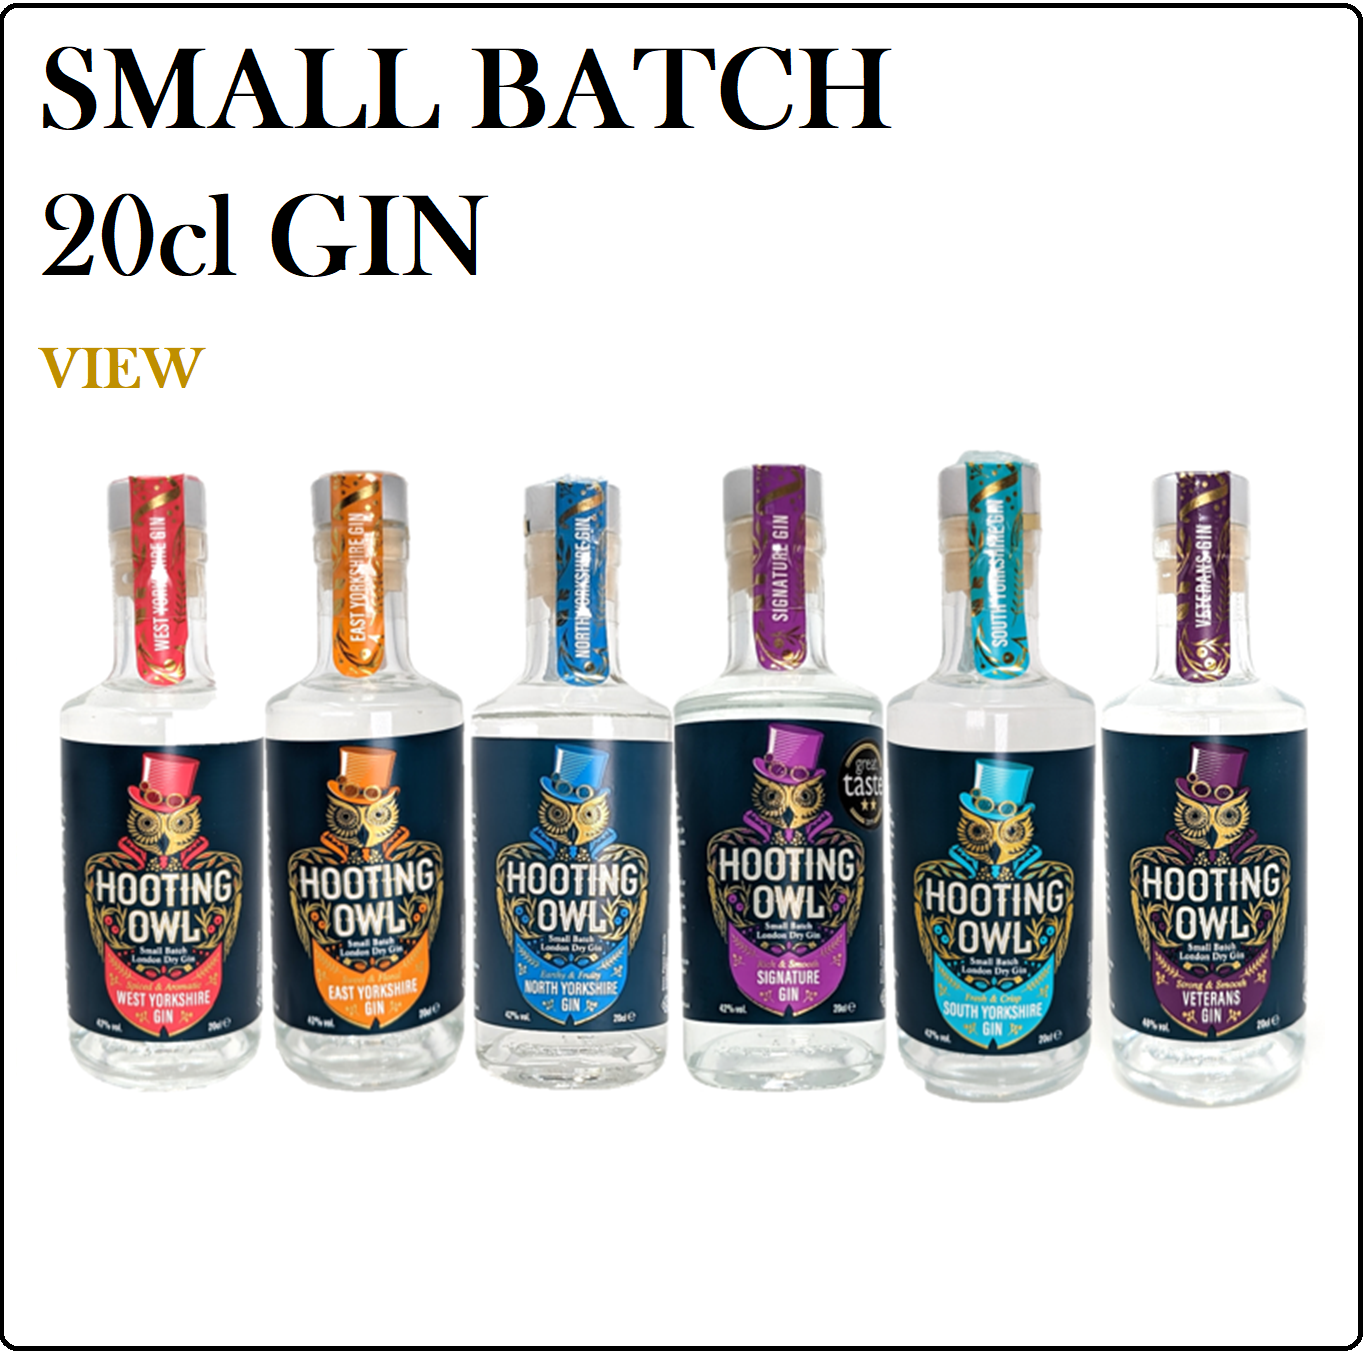 Small Batch 20cl Gin